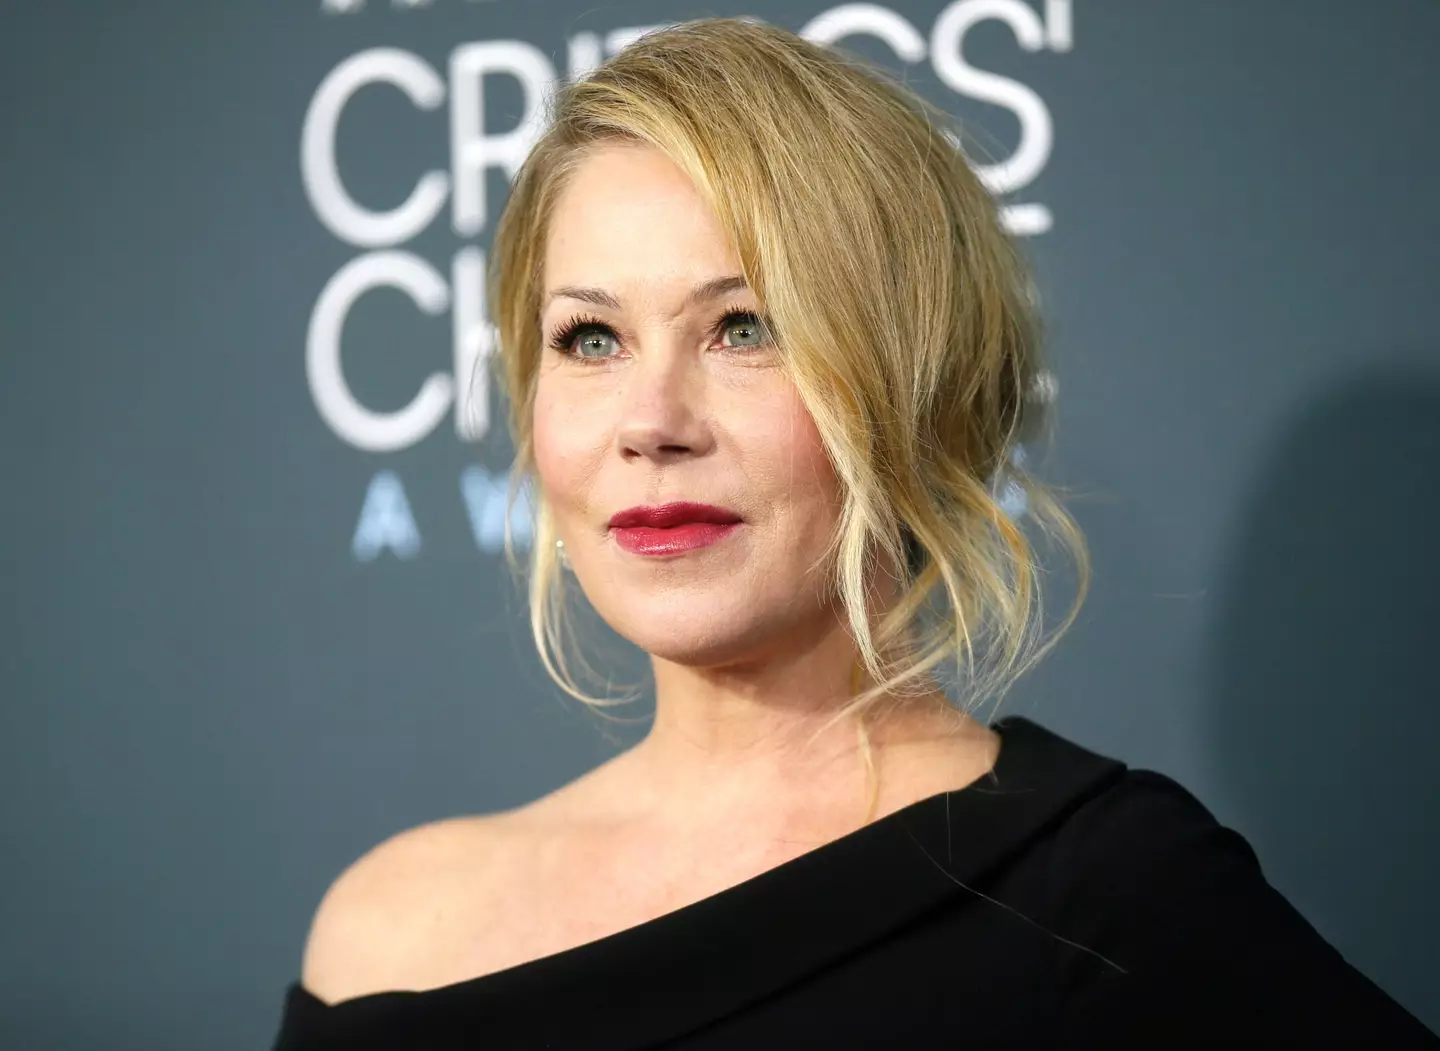 Applegate revealed she thinks the upcoming SAG Awards may be her last as an actor.